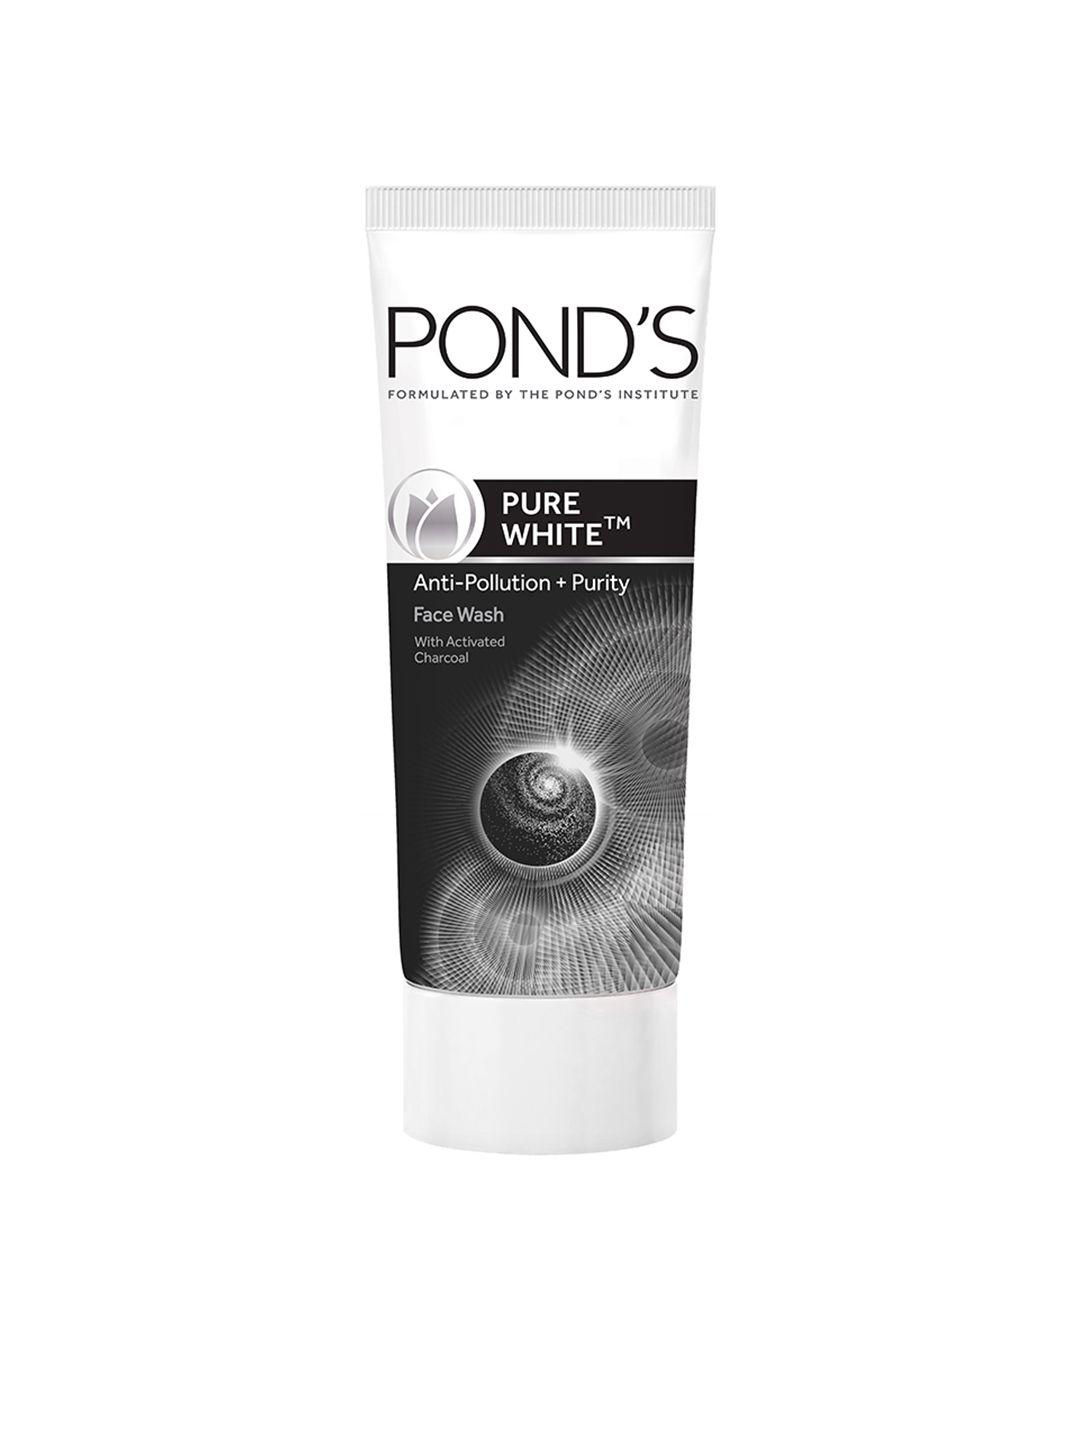 pond's pure white anti pollution activated charcoal face wash 150 gm